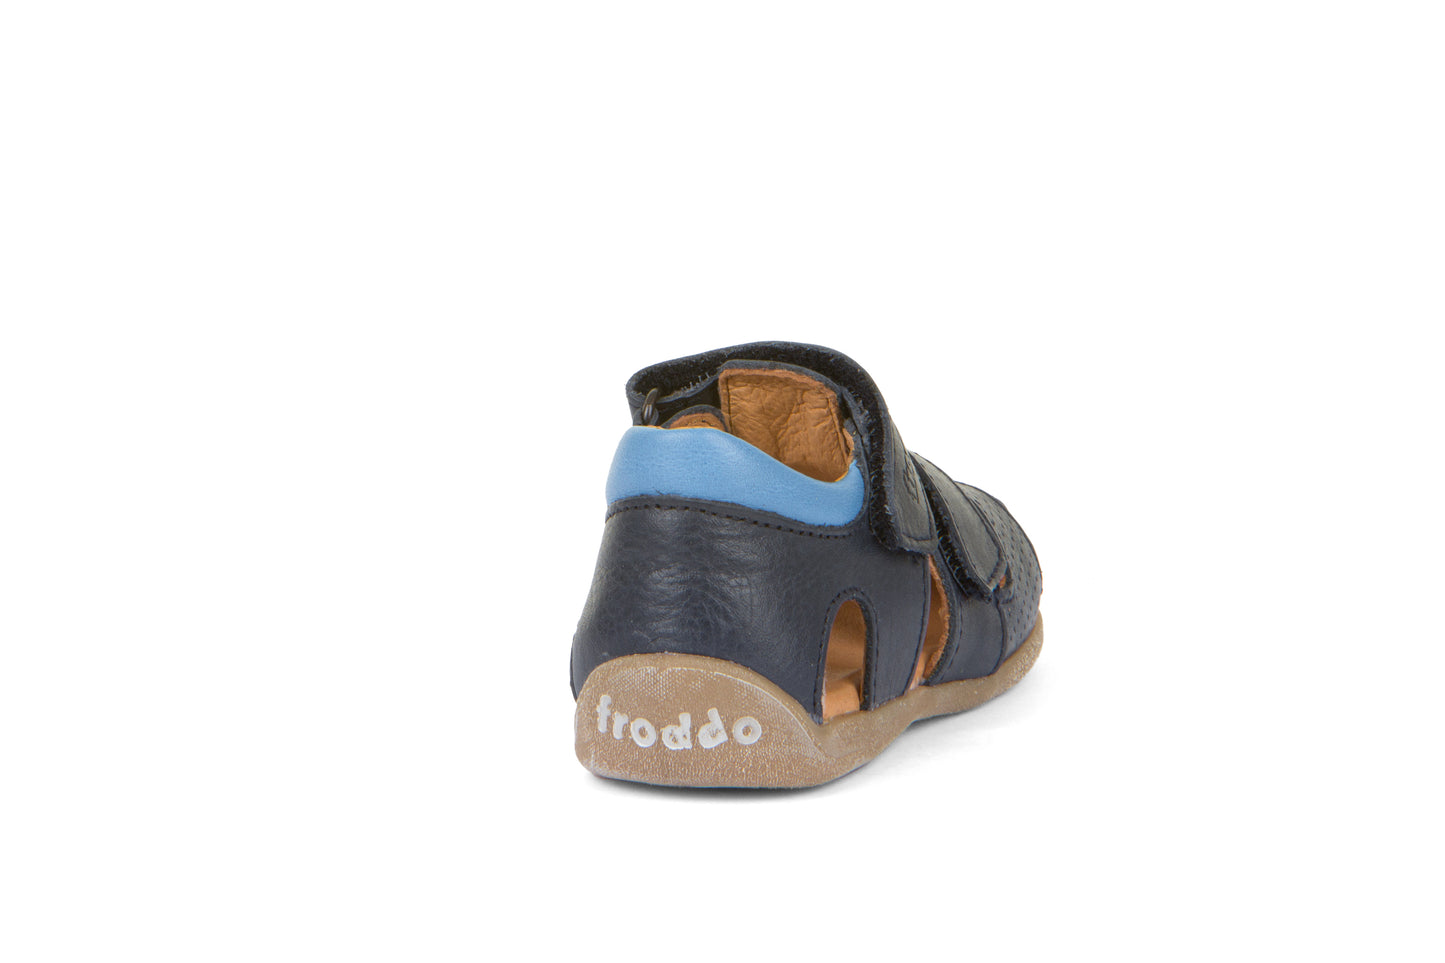 A boys closed toe sandal by Froddo, style G2150169 Carte Double, in navy with light blue collar, velcro fastening. Back view.